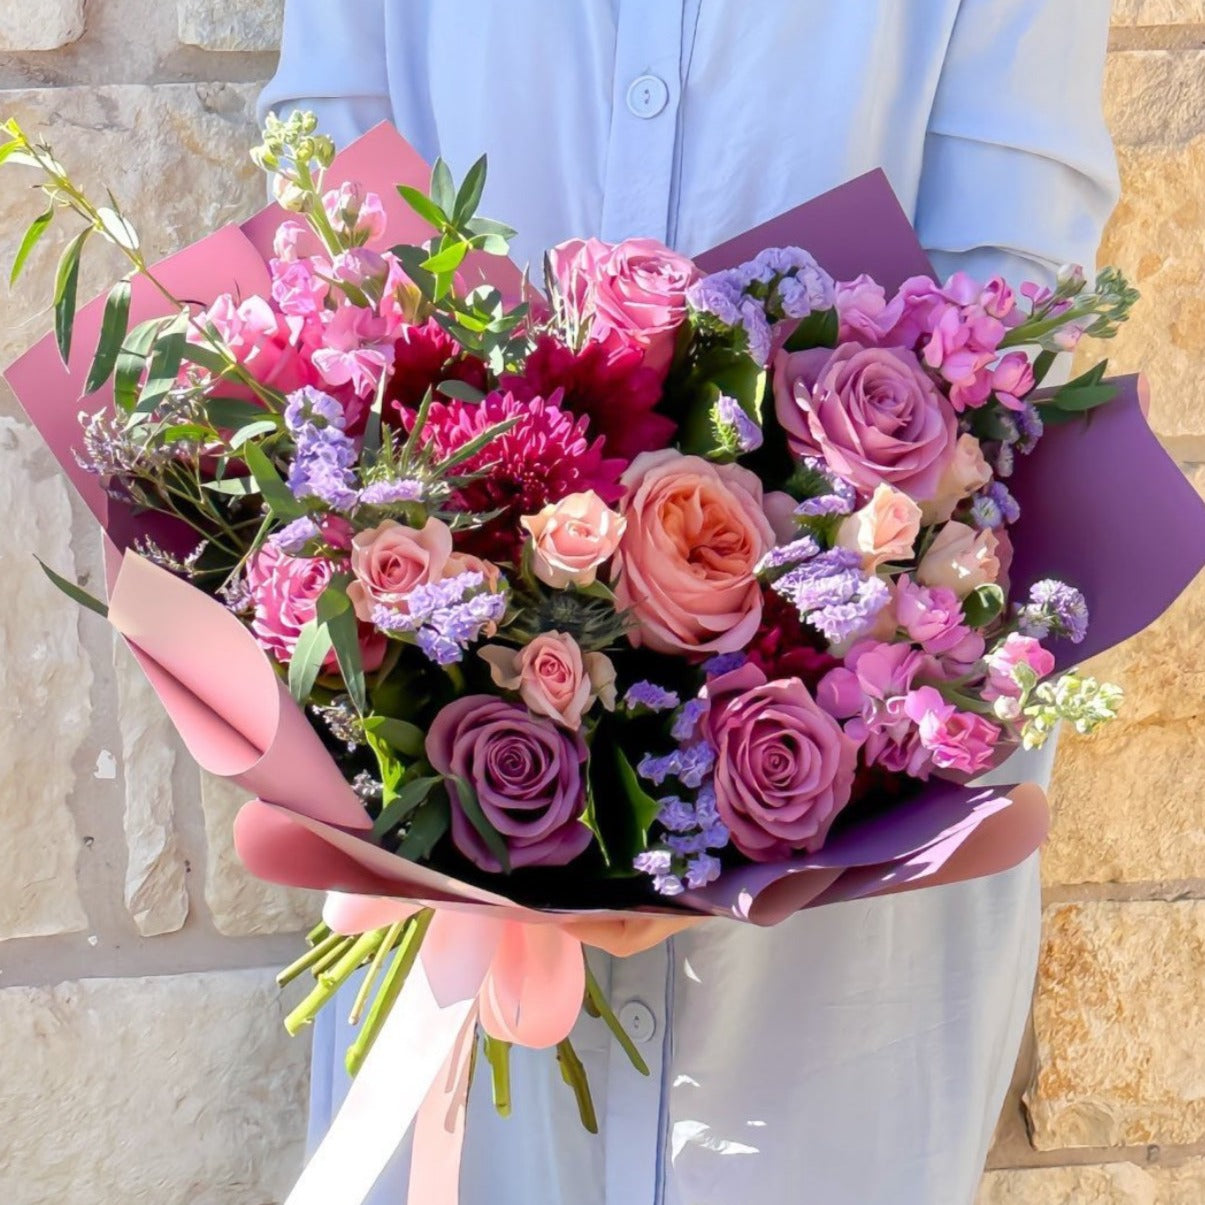 Large bouquet of roses, and Spring flowers.